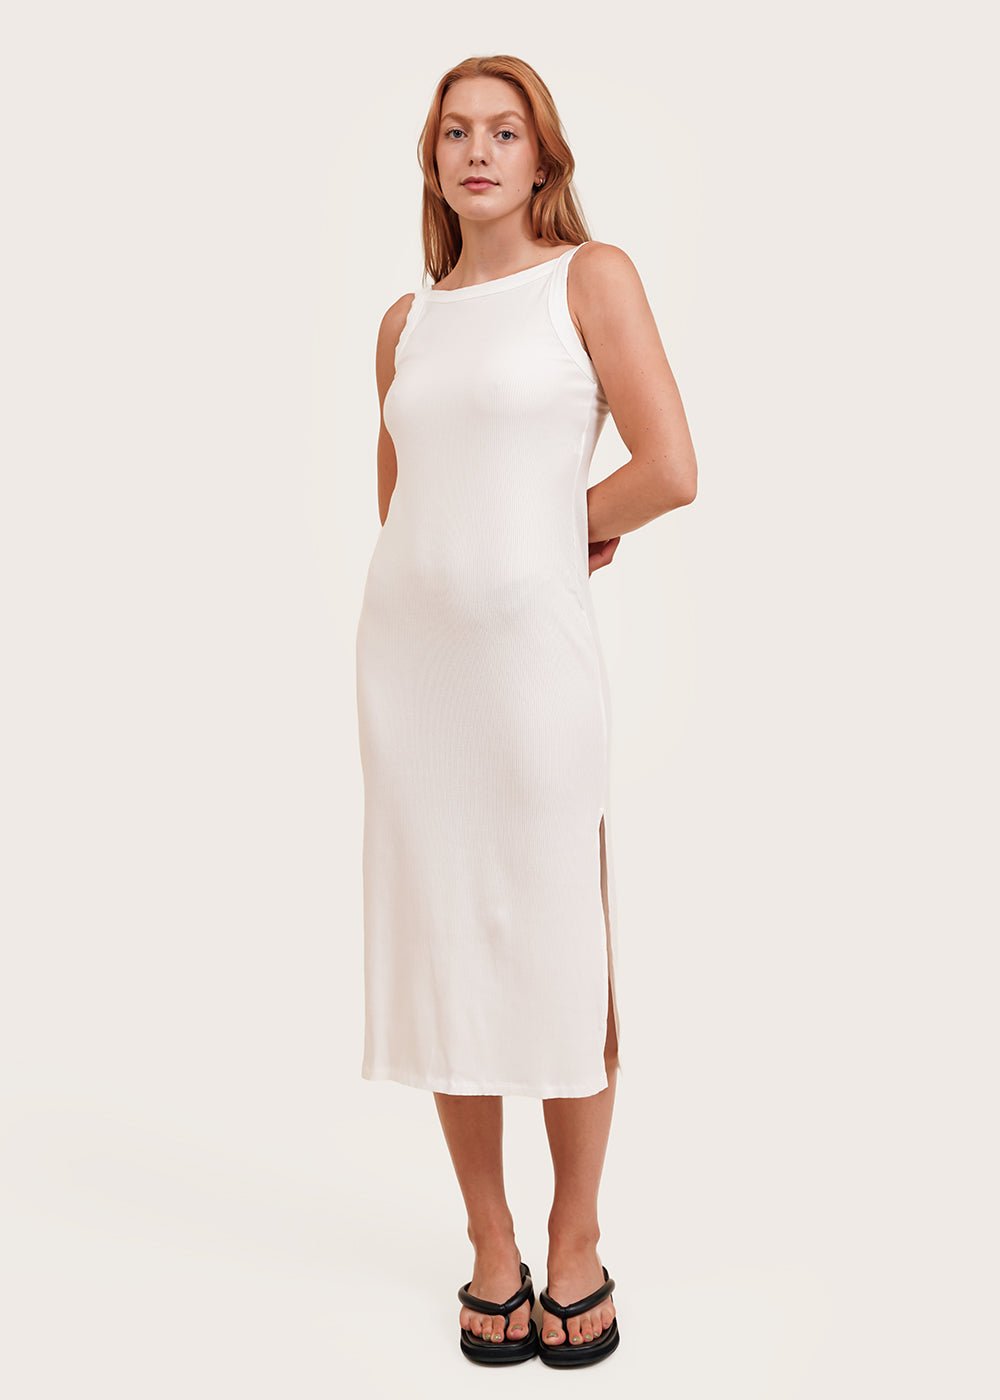 Angie Bauer White Holland Dress - New Classics Studios Sustainable Ethical Fashion Canada